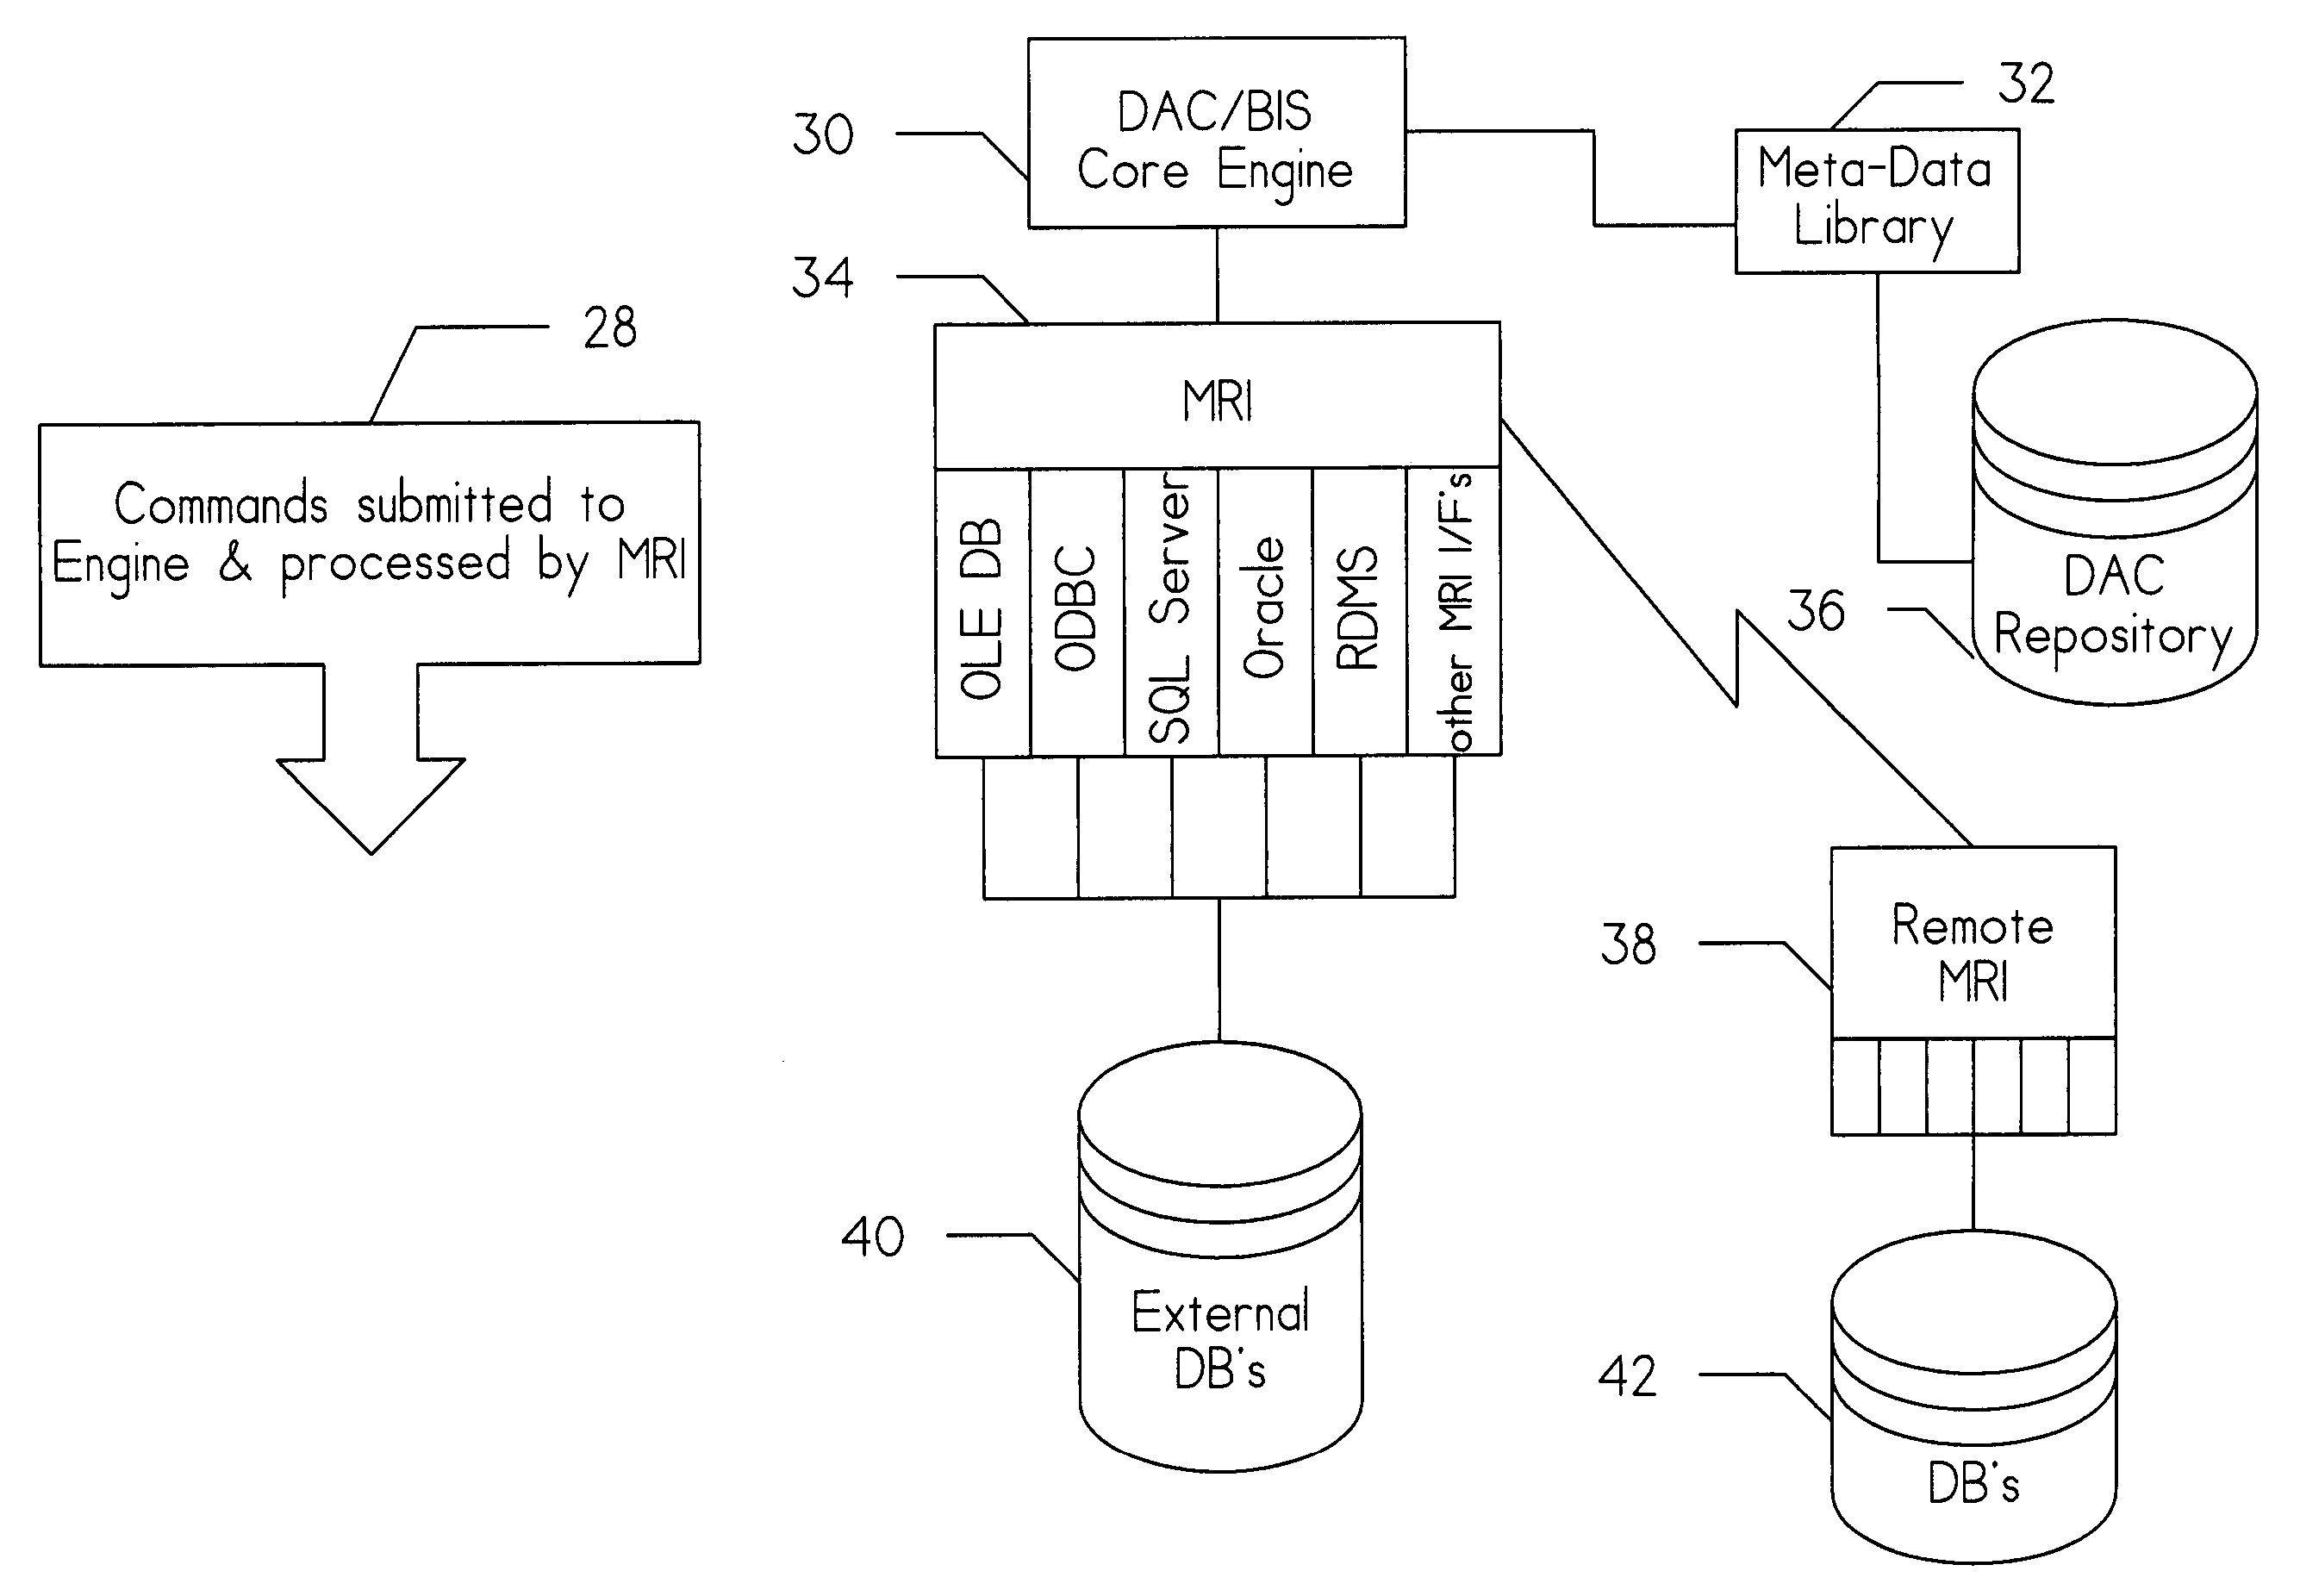 Method and apparatus for mapping data types from heterogeneous databases into a single set of data types